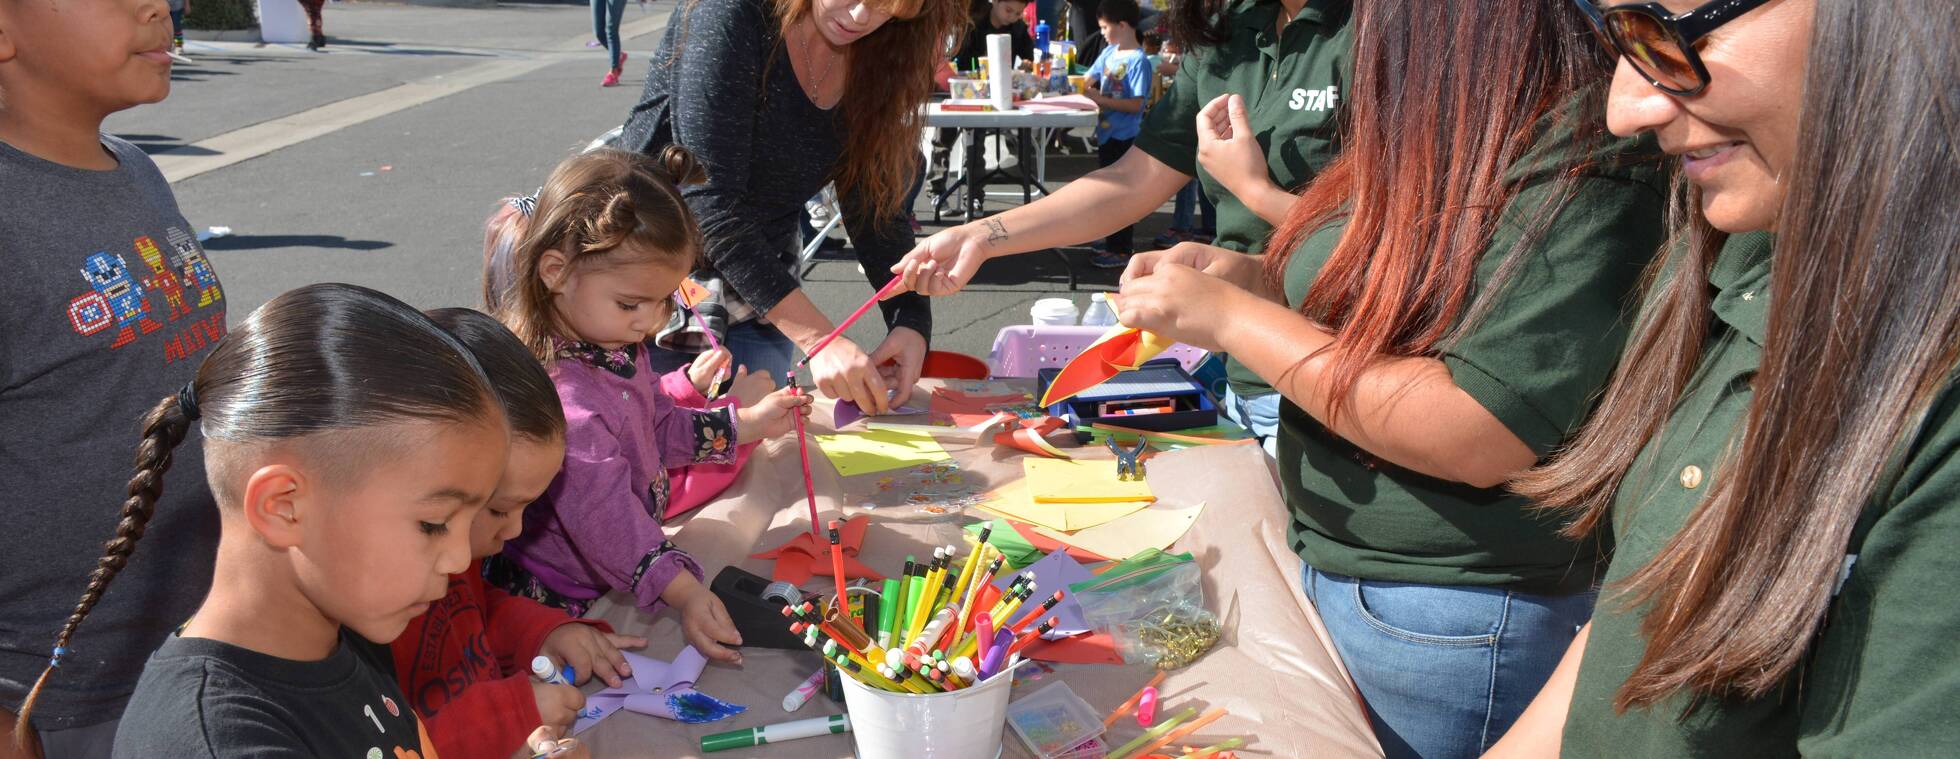 Victor Valley Family Play Day Vendor Booth Application